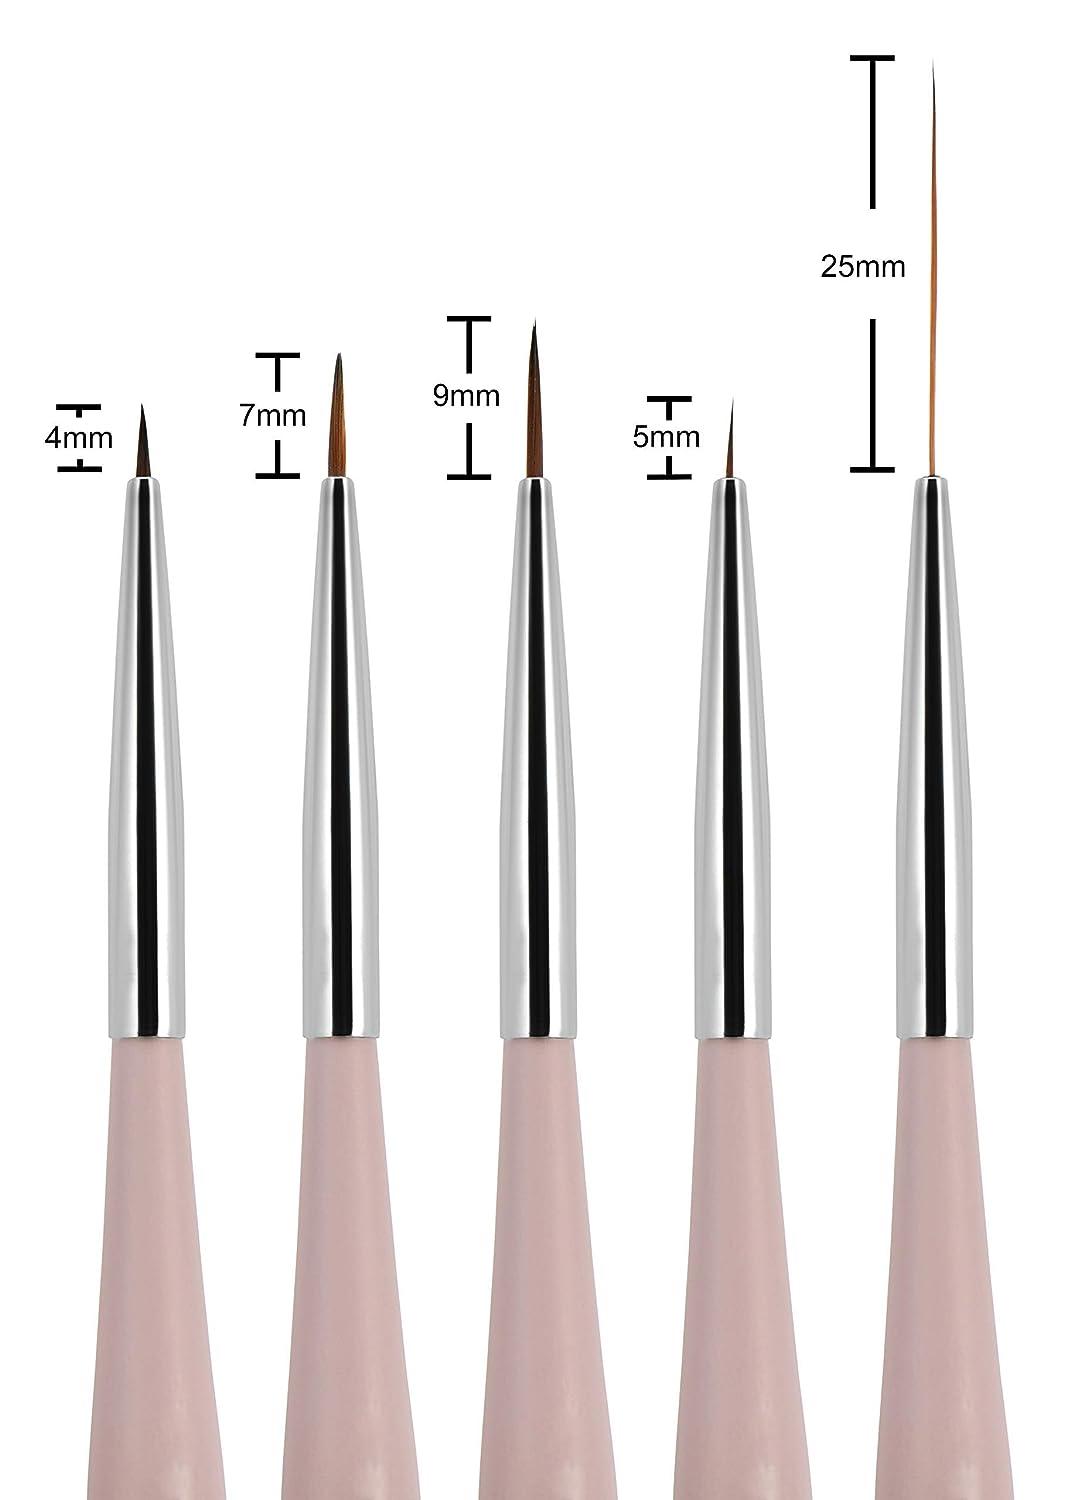 Beaute Galleria 5 Pieces Nail Art Brush Set with Liners (4mm 7mm 9mm)  Striping Brushes (5mm 25mm) for Thin Fine Line Drawing Detail Painting  Striping Blending One Stroke